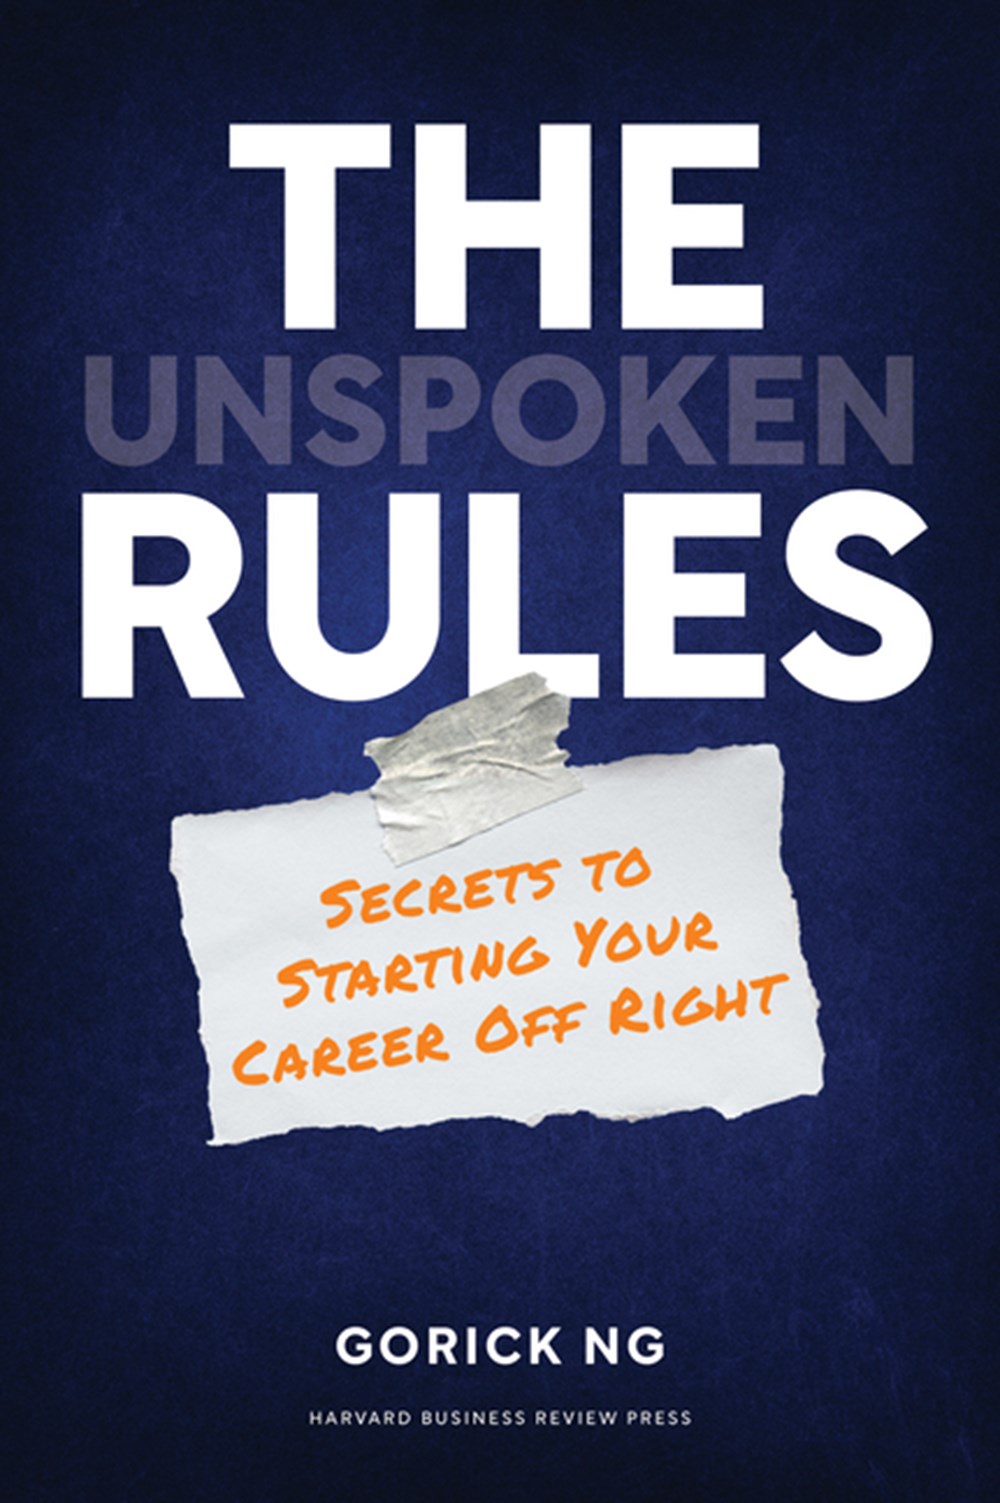 Unspoken Rules Secrets to Starting Your Career Off Right